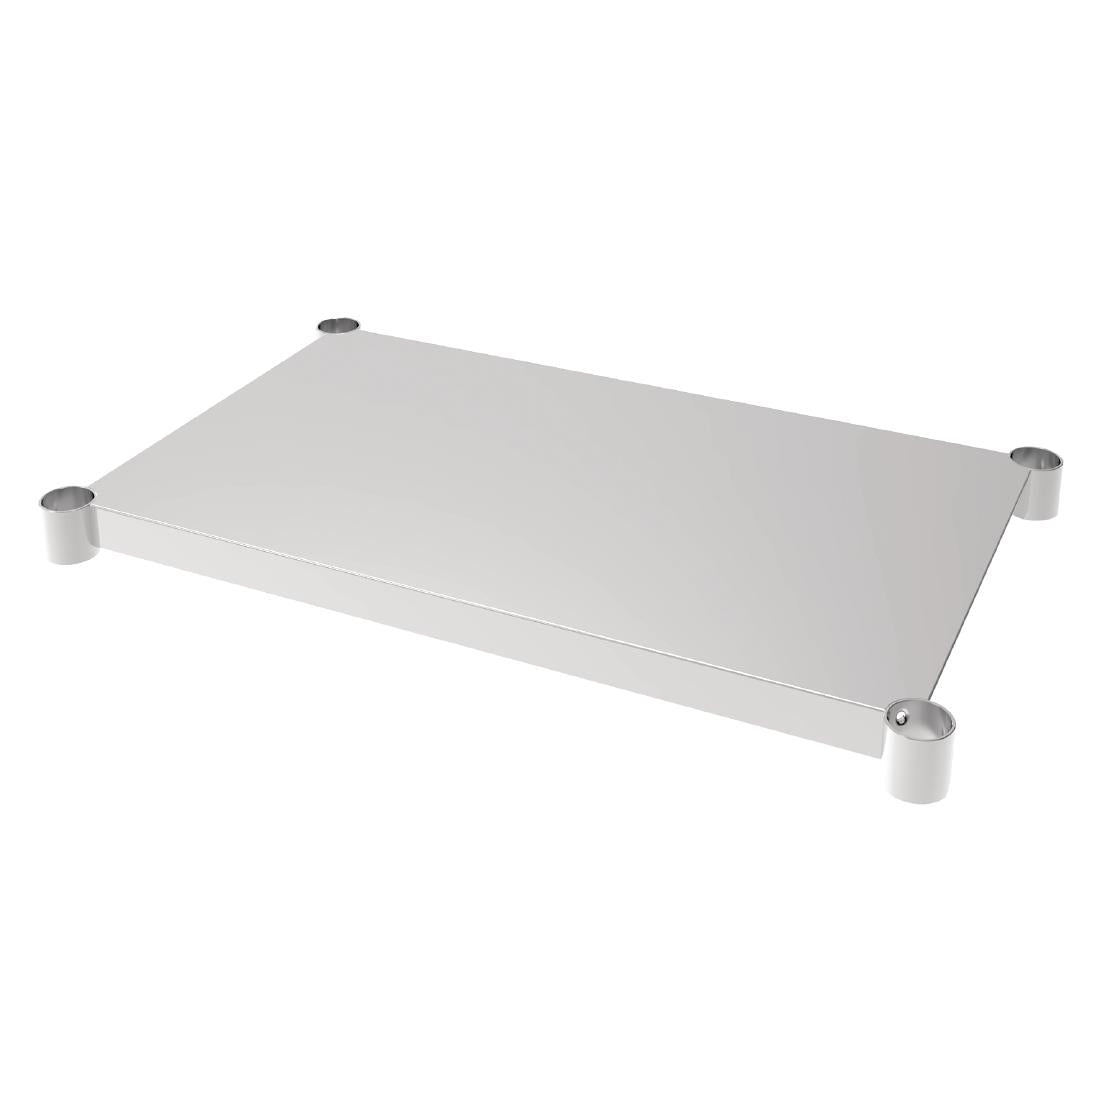 CP831 Vogue Steel Table Shelf 900x600mm JD Catering Equipment Solutions Ltd